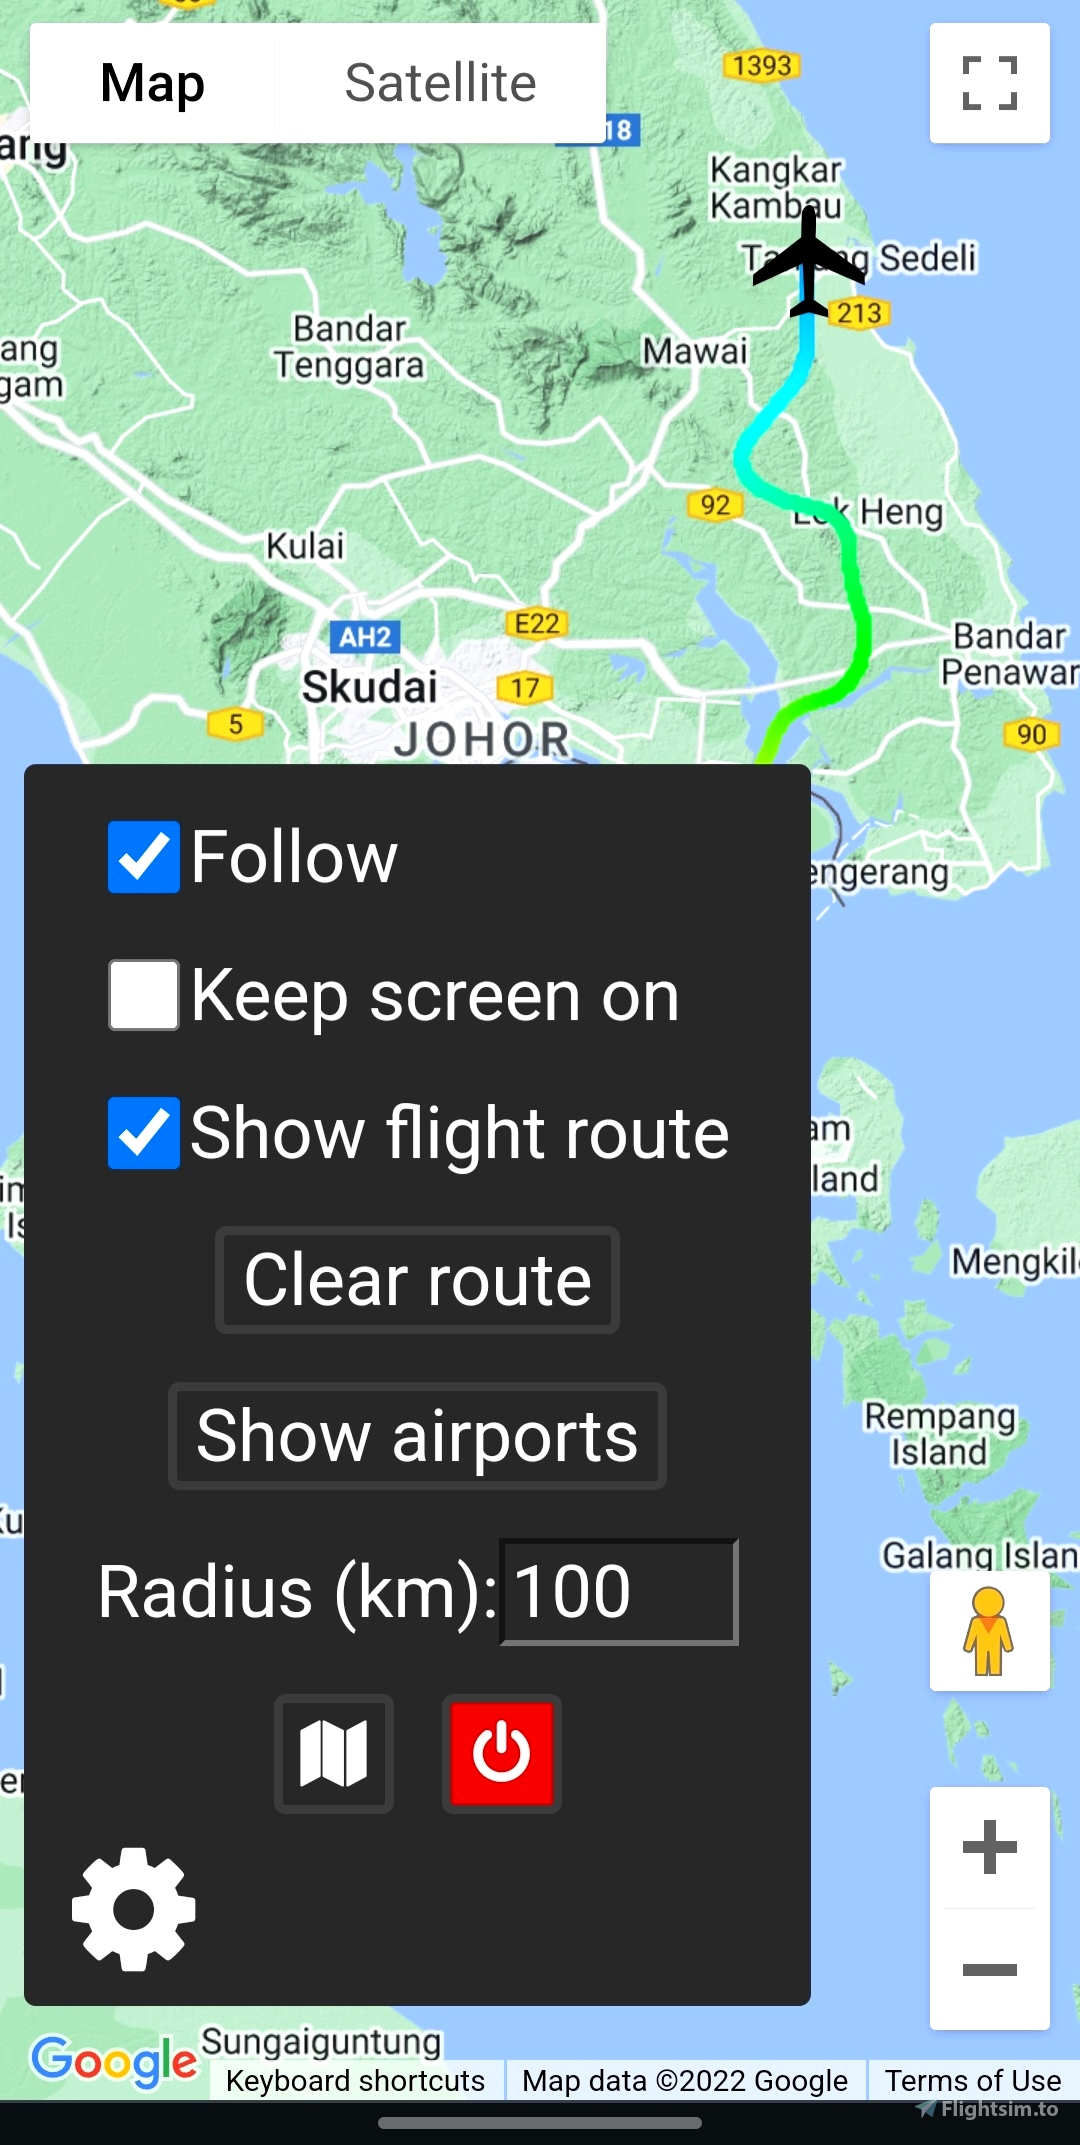 GitHub - Rybeusz100/msfs-google-maps: A web app that allows to monitor your  flight on an interactive map from any device with a web browser.